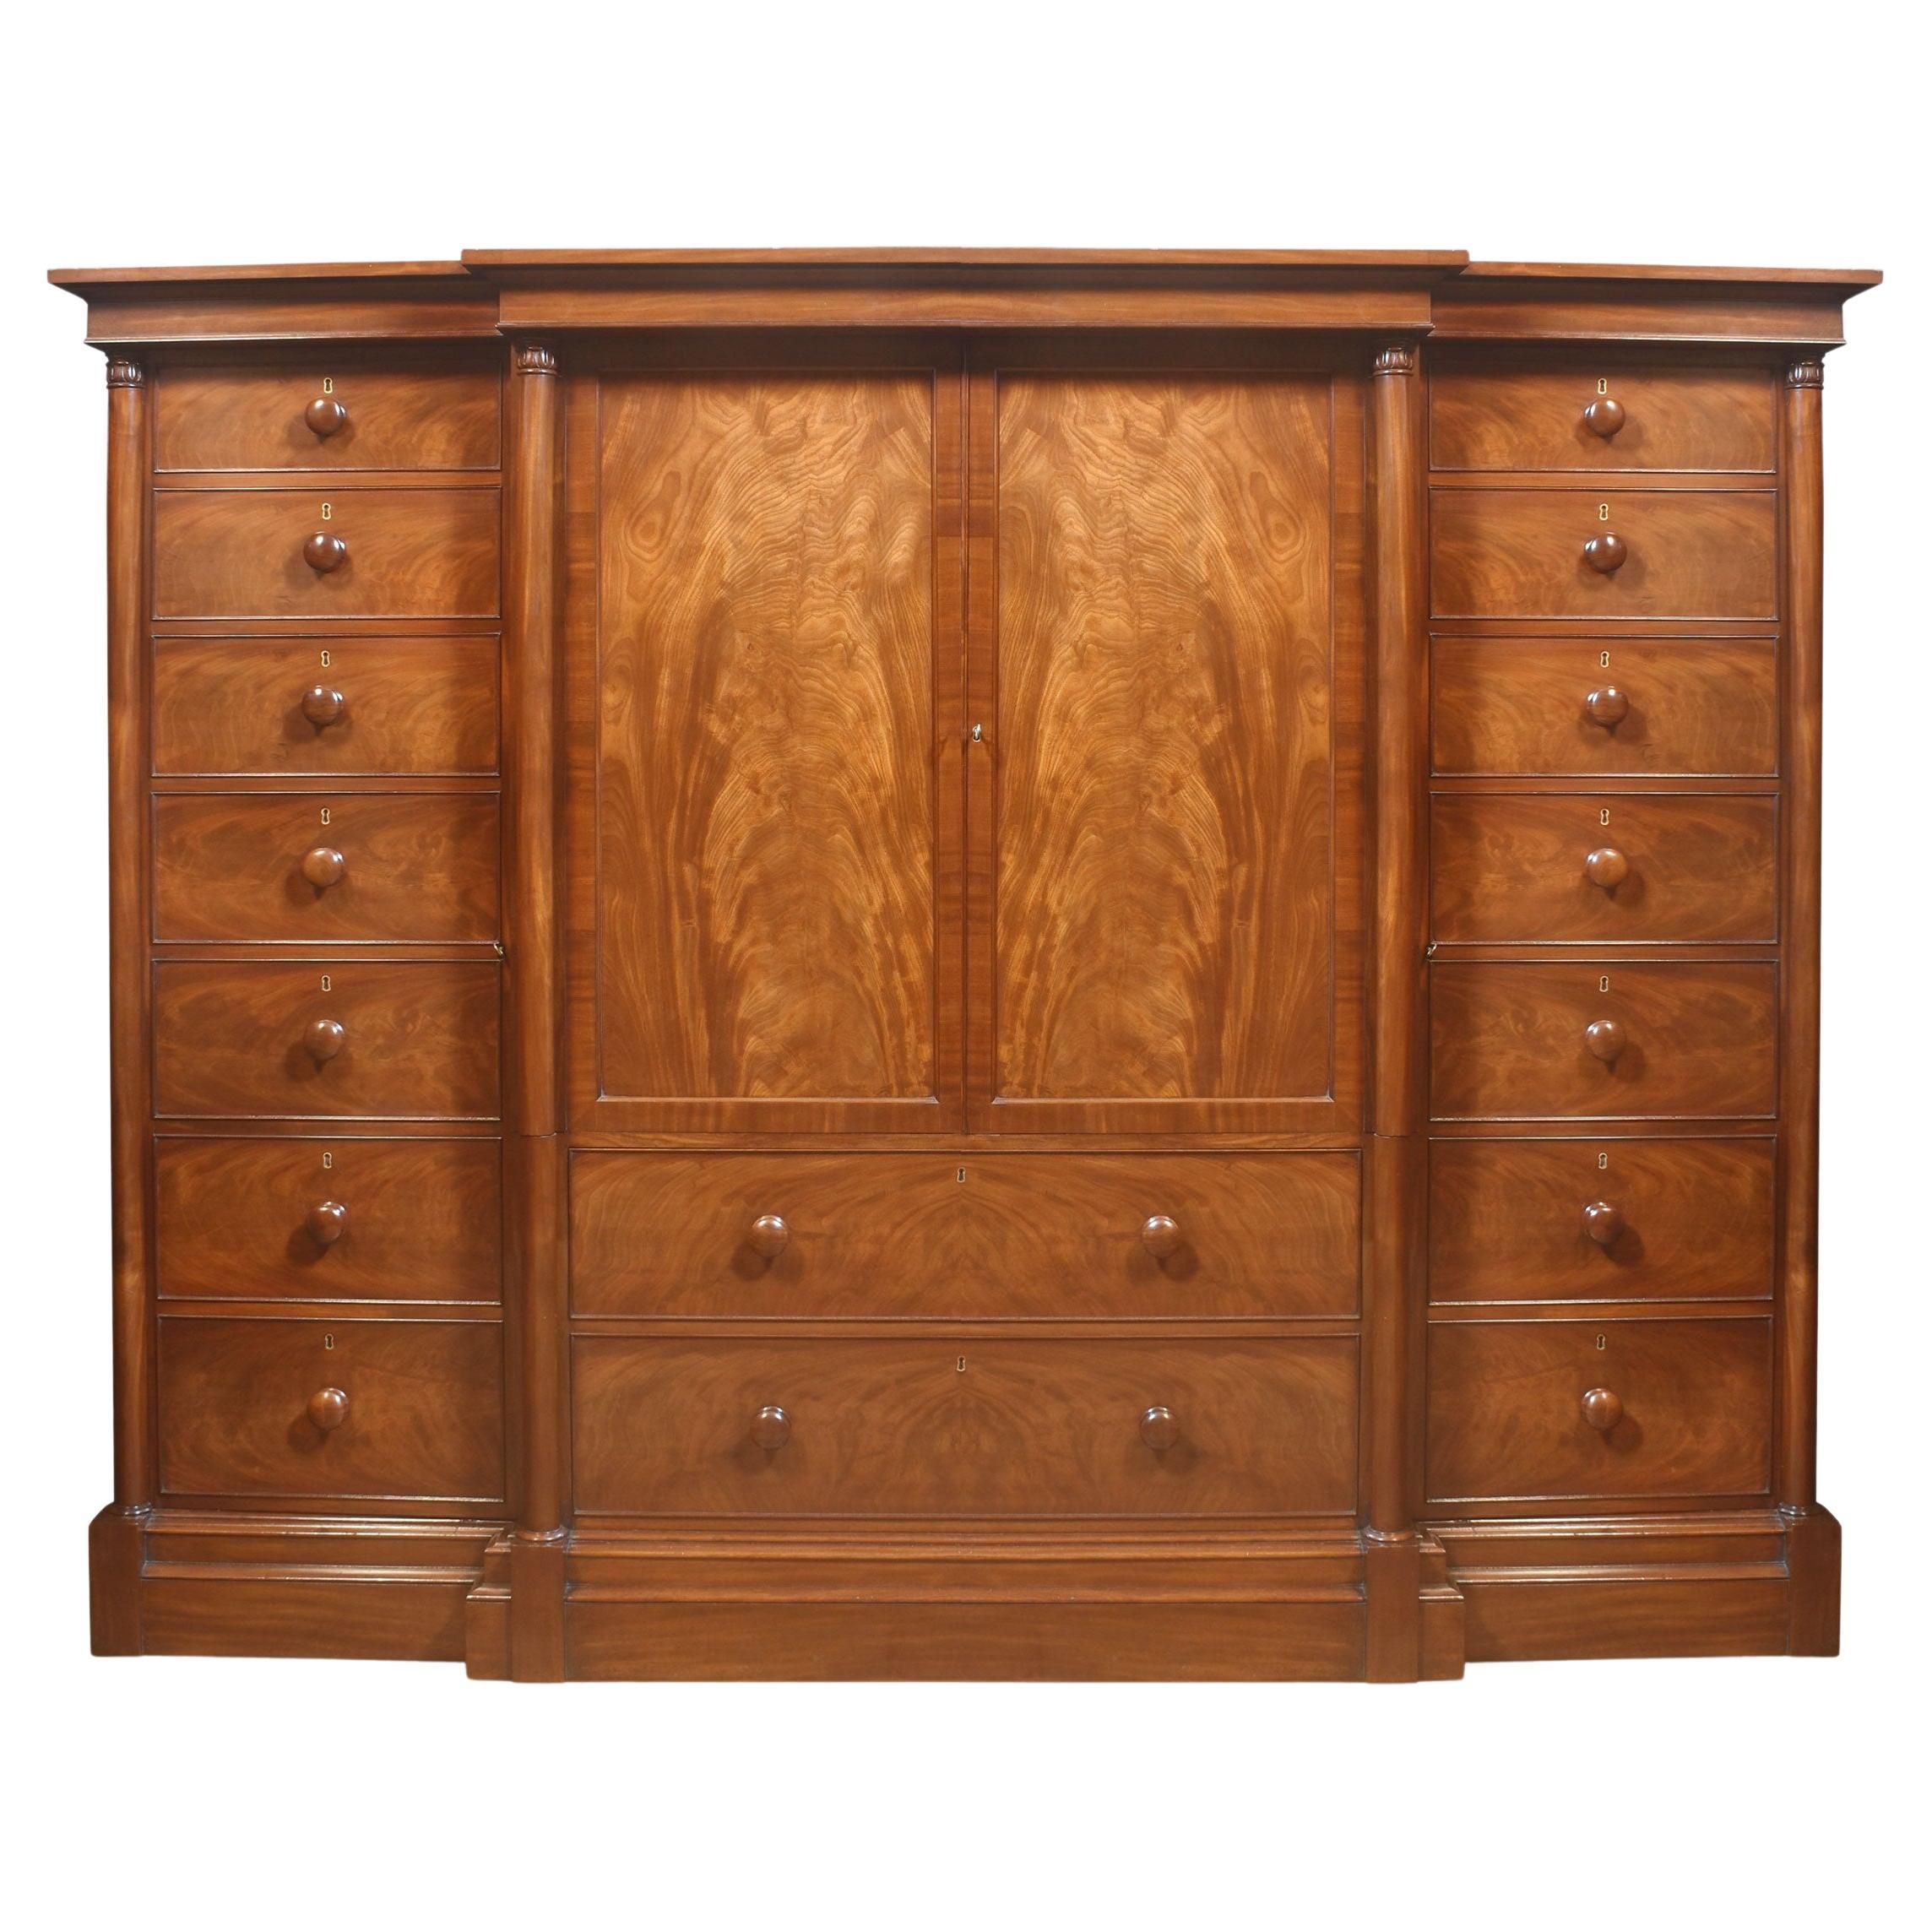 19th Century Breakfront Wardrobe For Sale At 1stdibs Pertaining To Mahogany Breakfront Wardrobes (View 11 of 15)